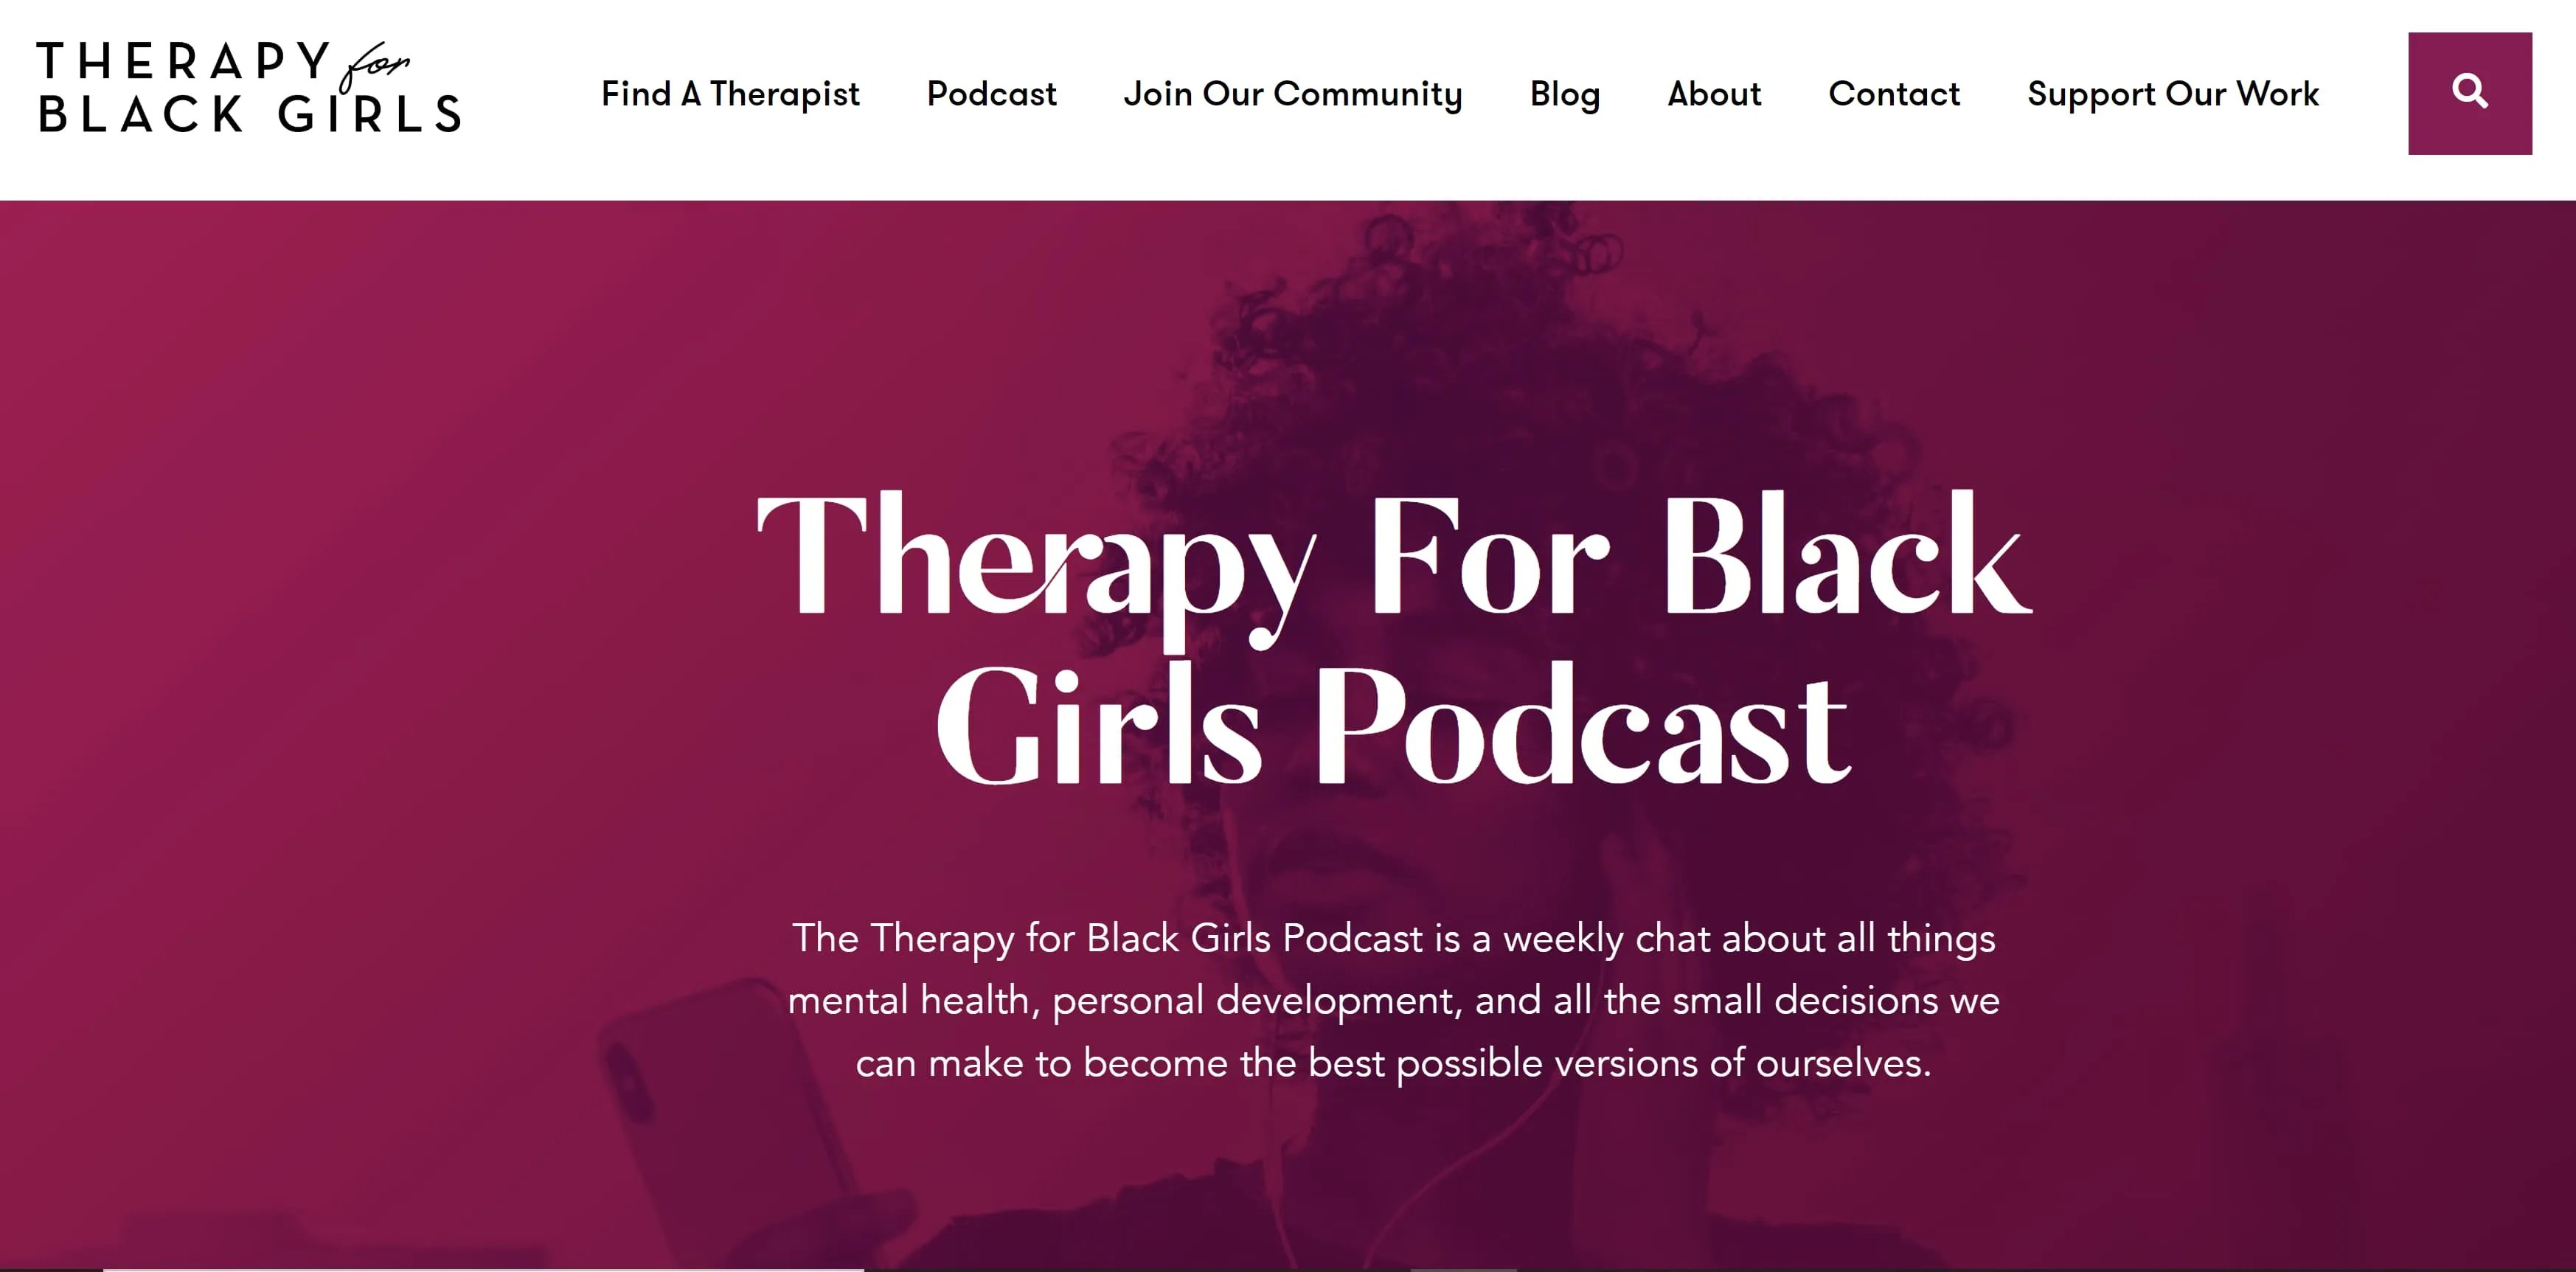 Therapy for Black Girls is an example of a digital creator with a niche